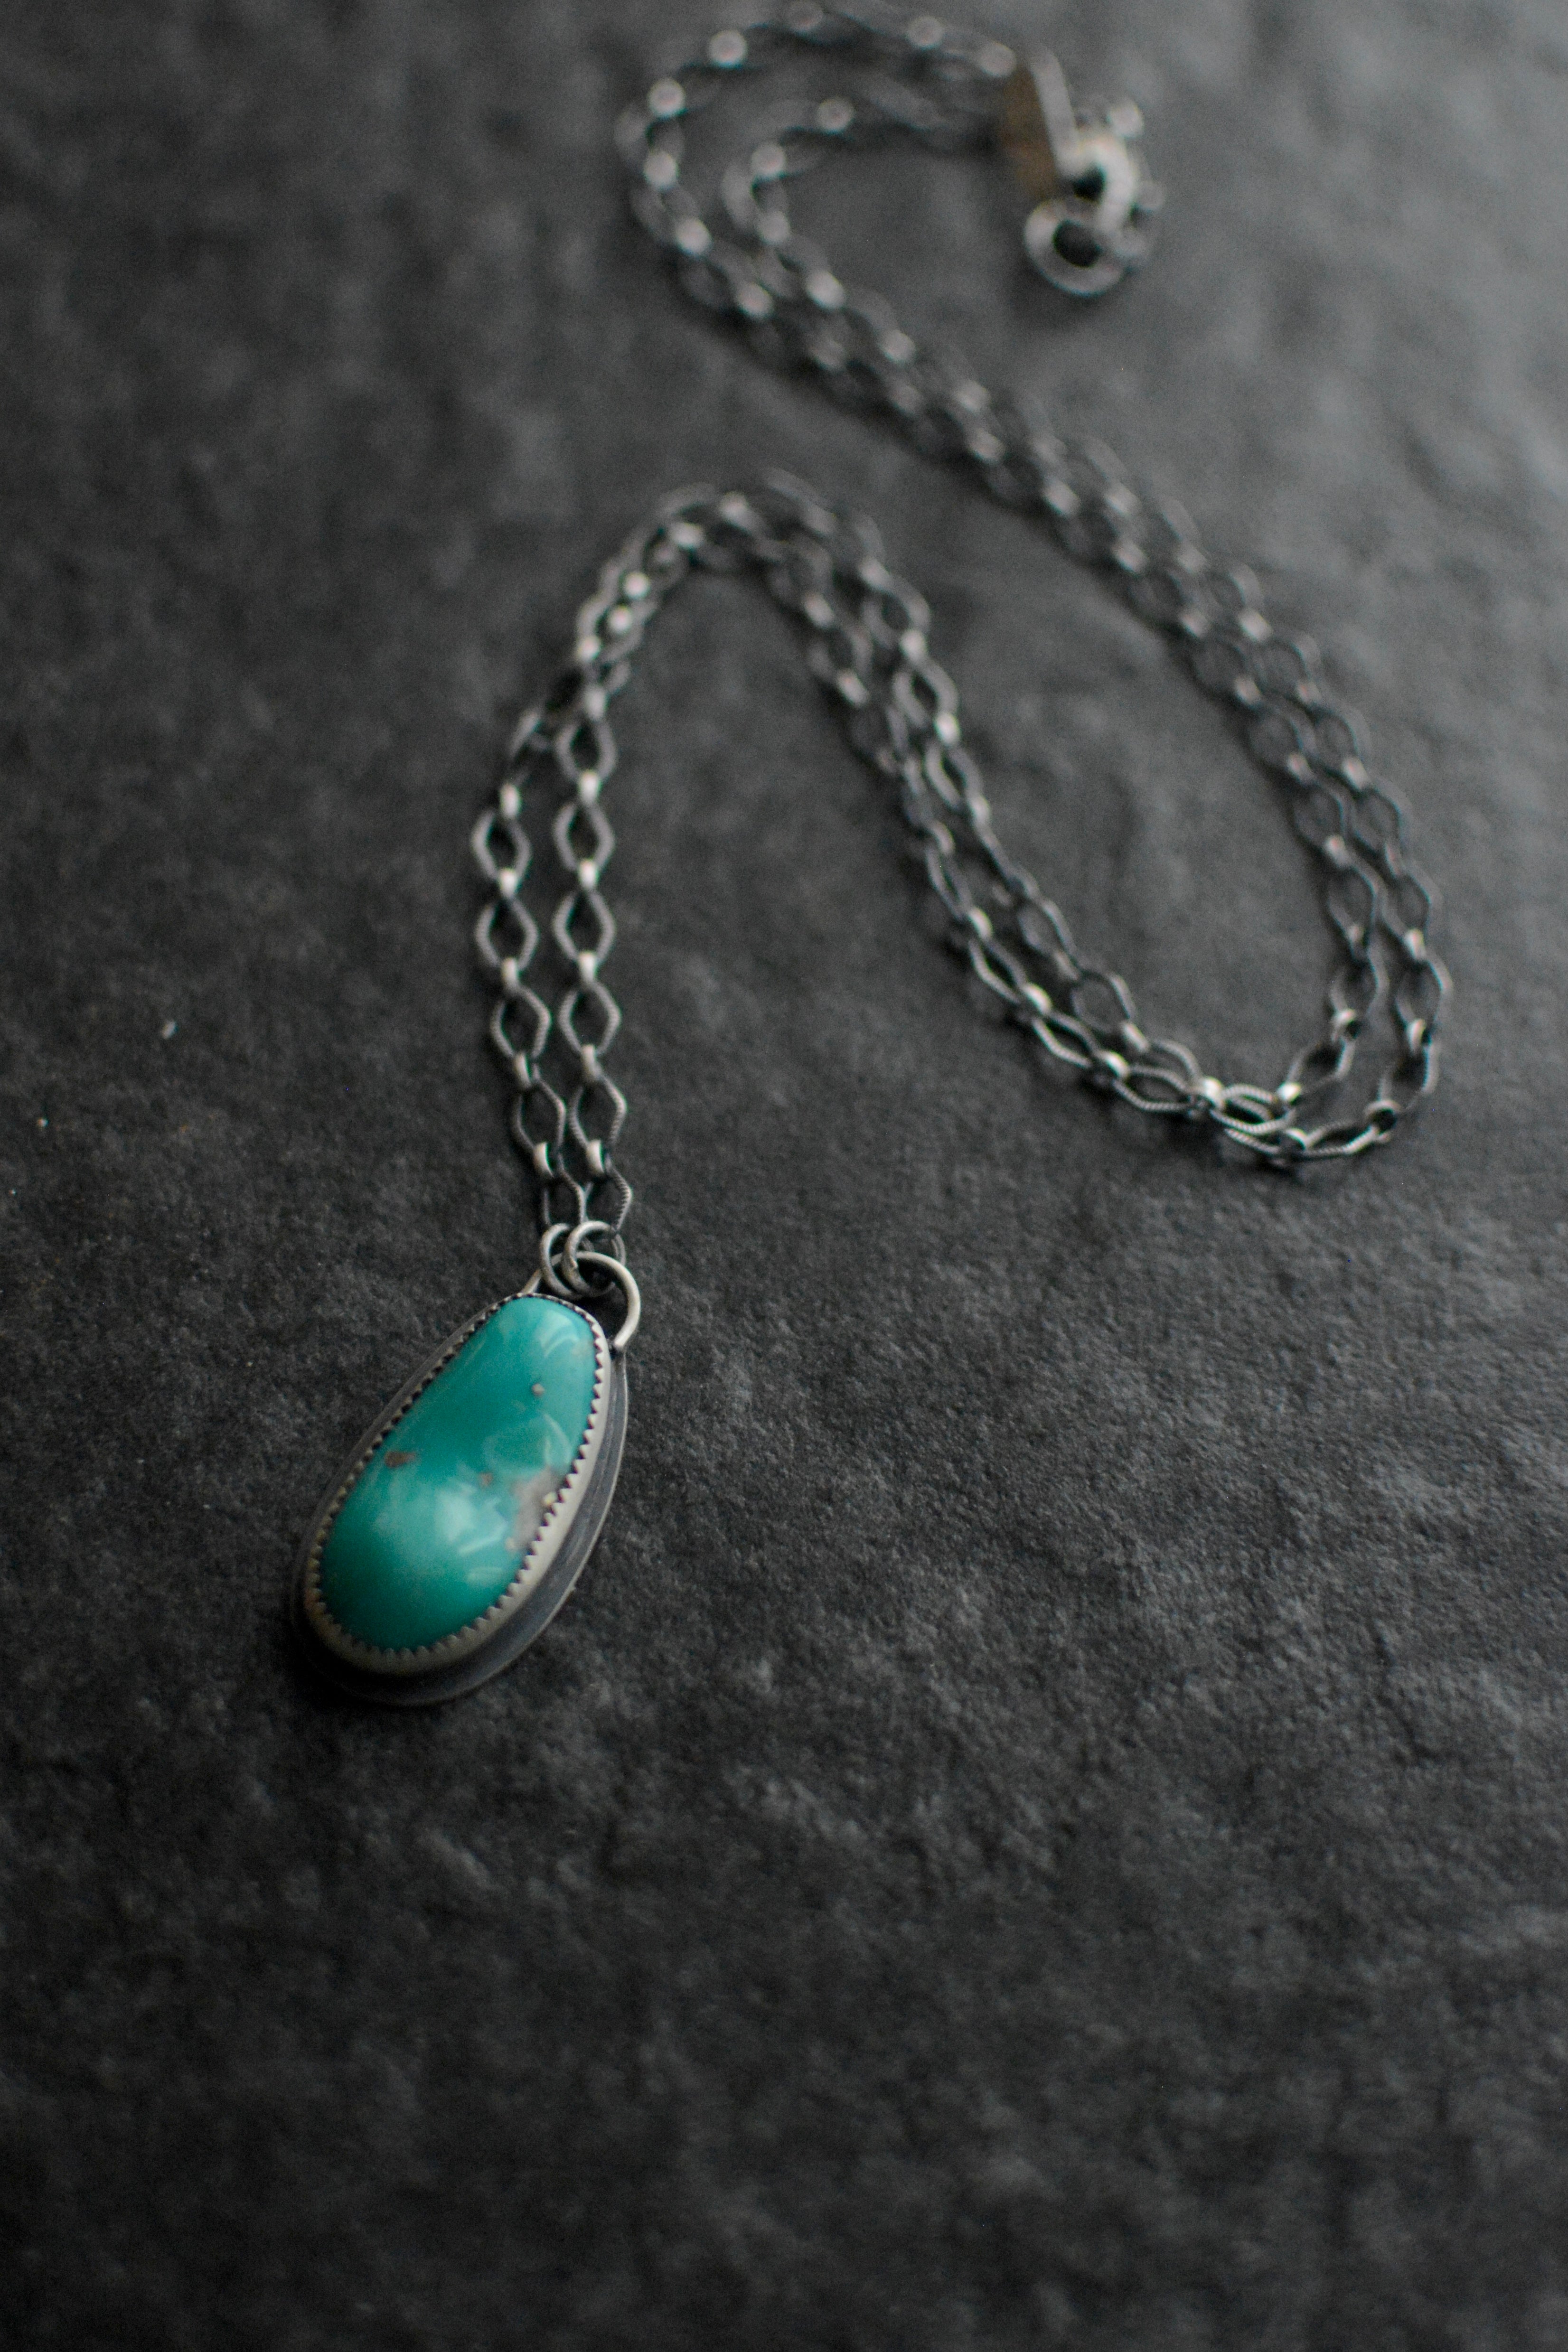 Campitos Turquoise Necklace - No. 1